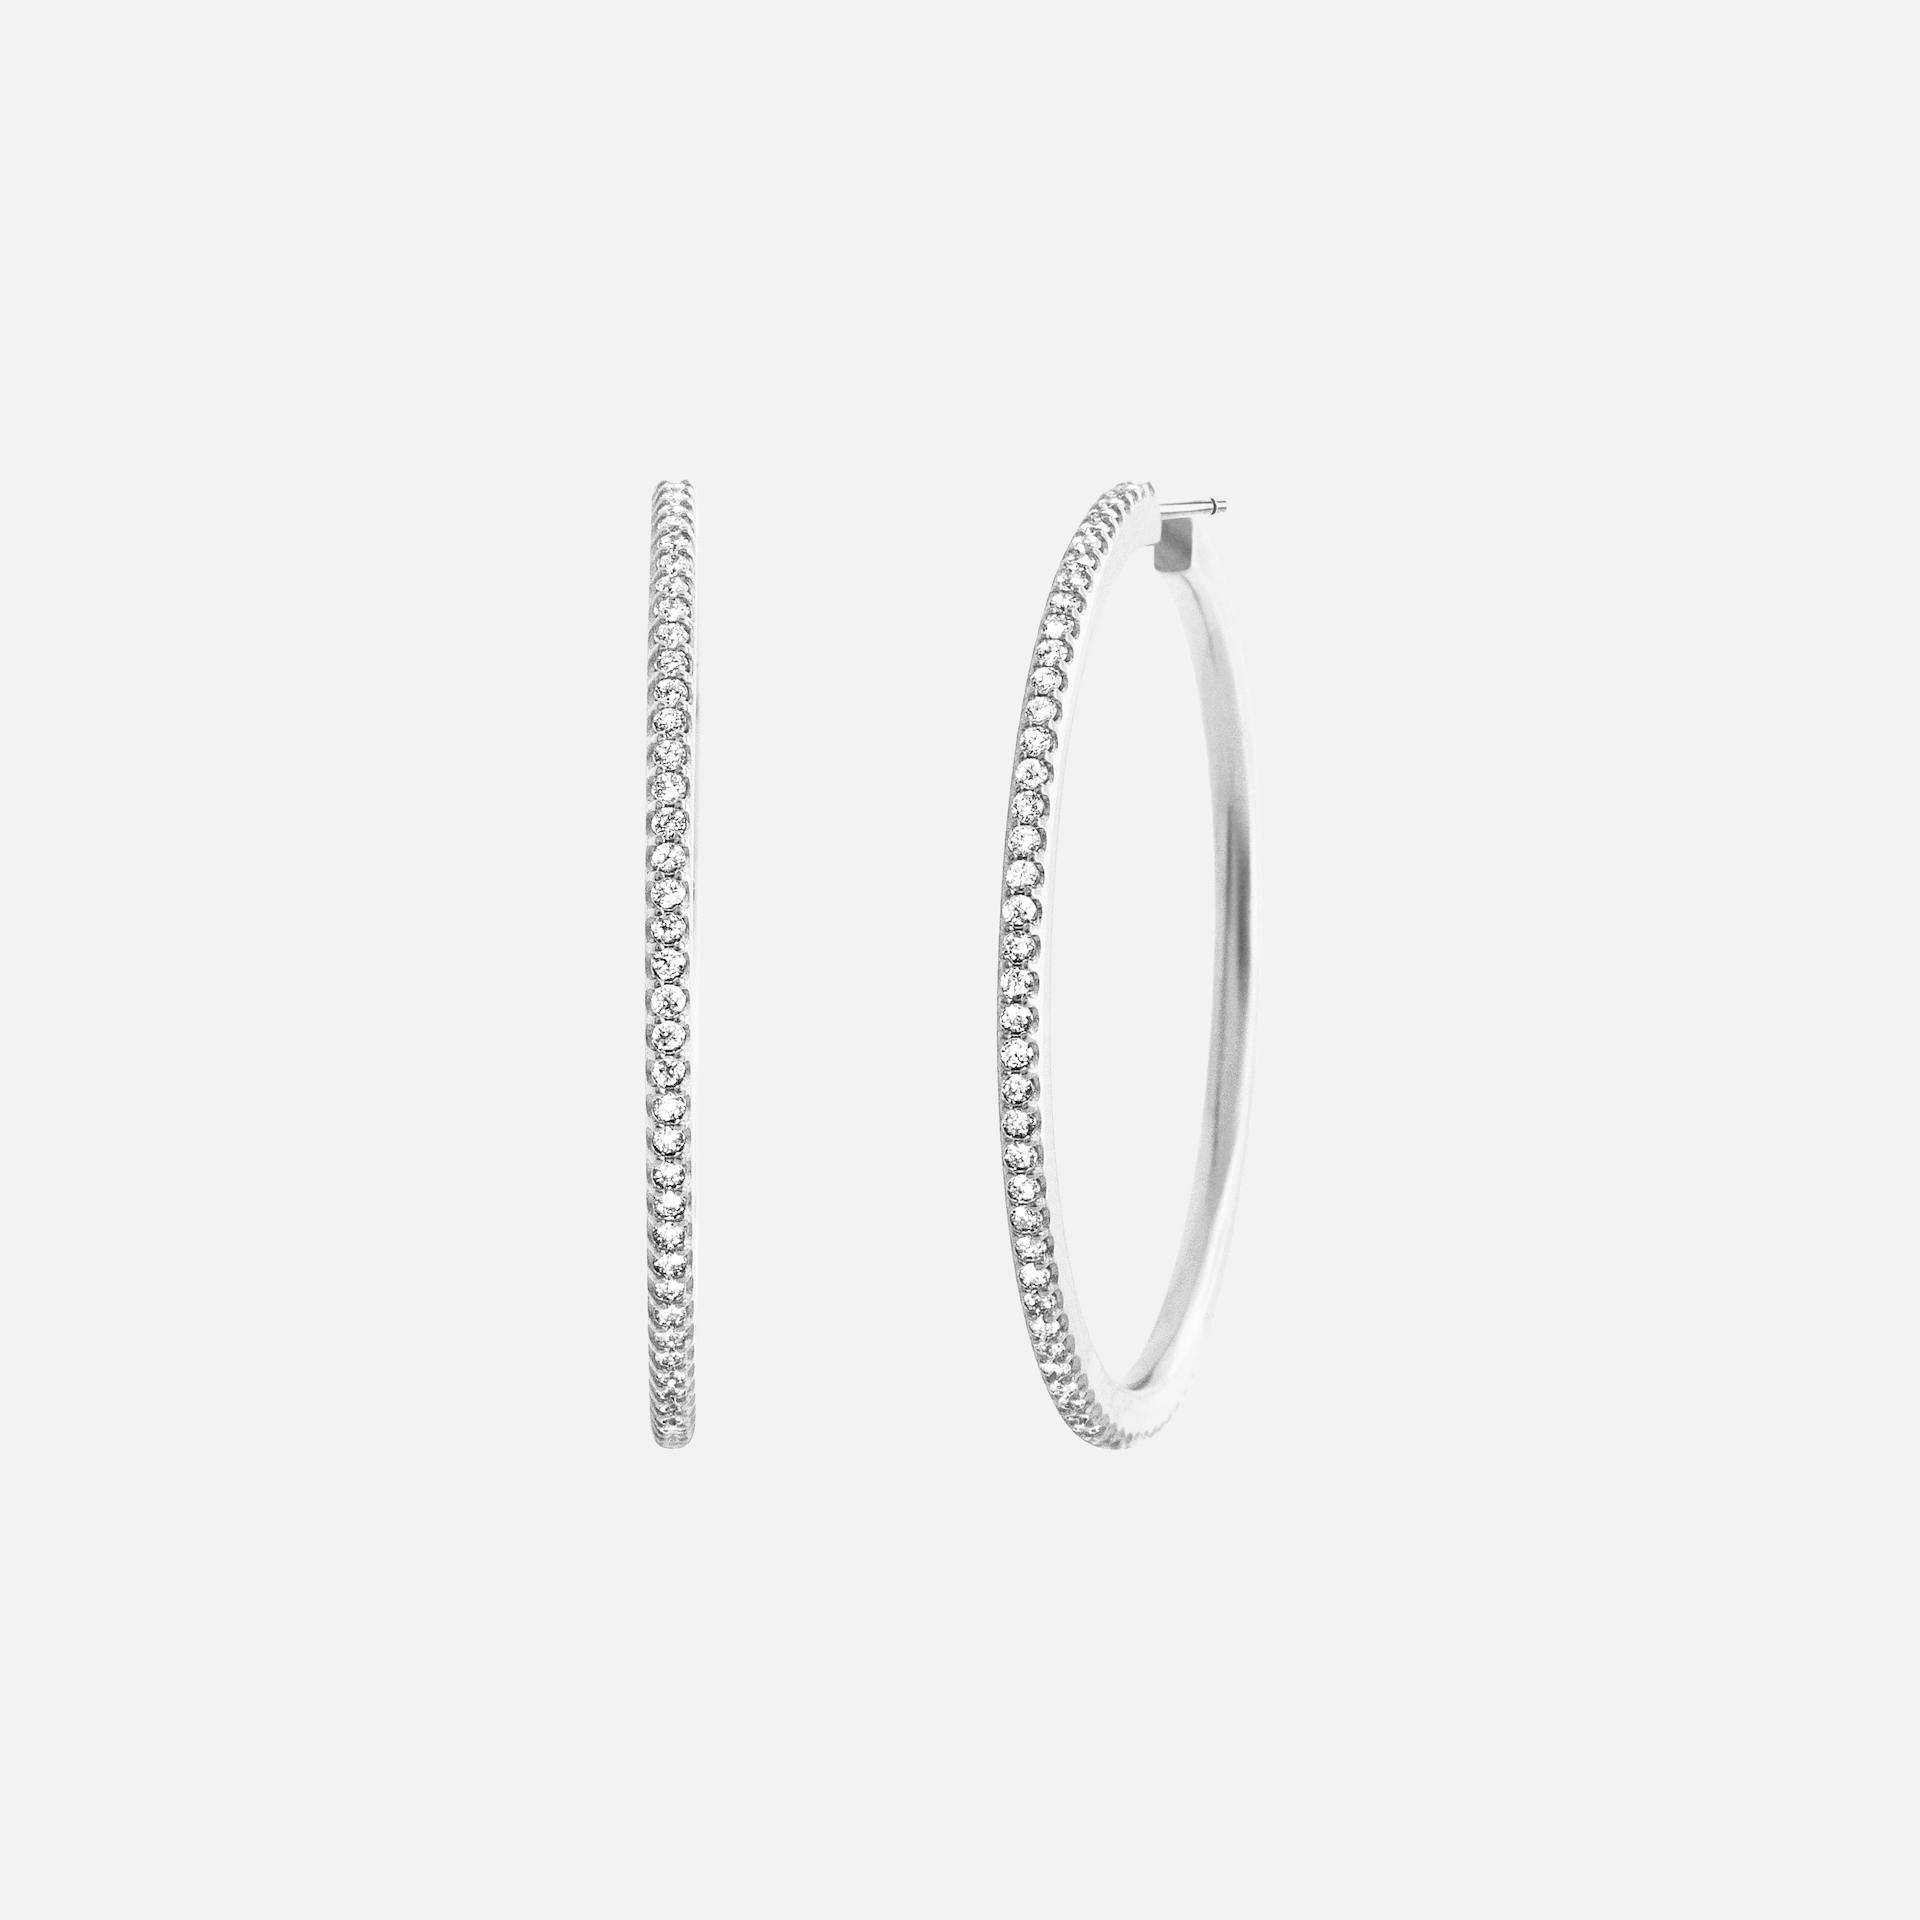 Love Bands Creol Earrings Giga in White Gold with Diamonds  |  Ole Lynggaard Copenhagen 